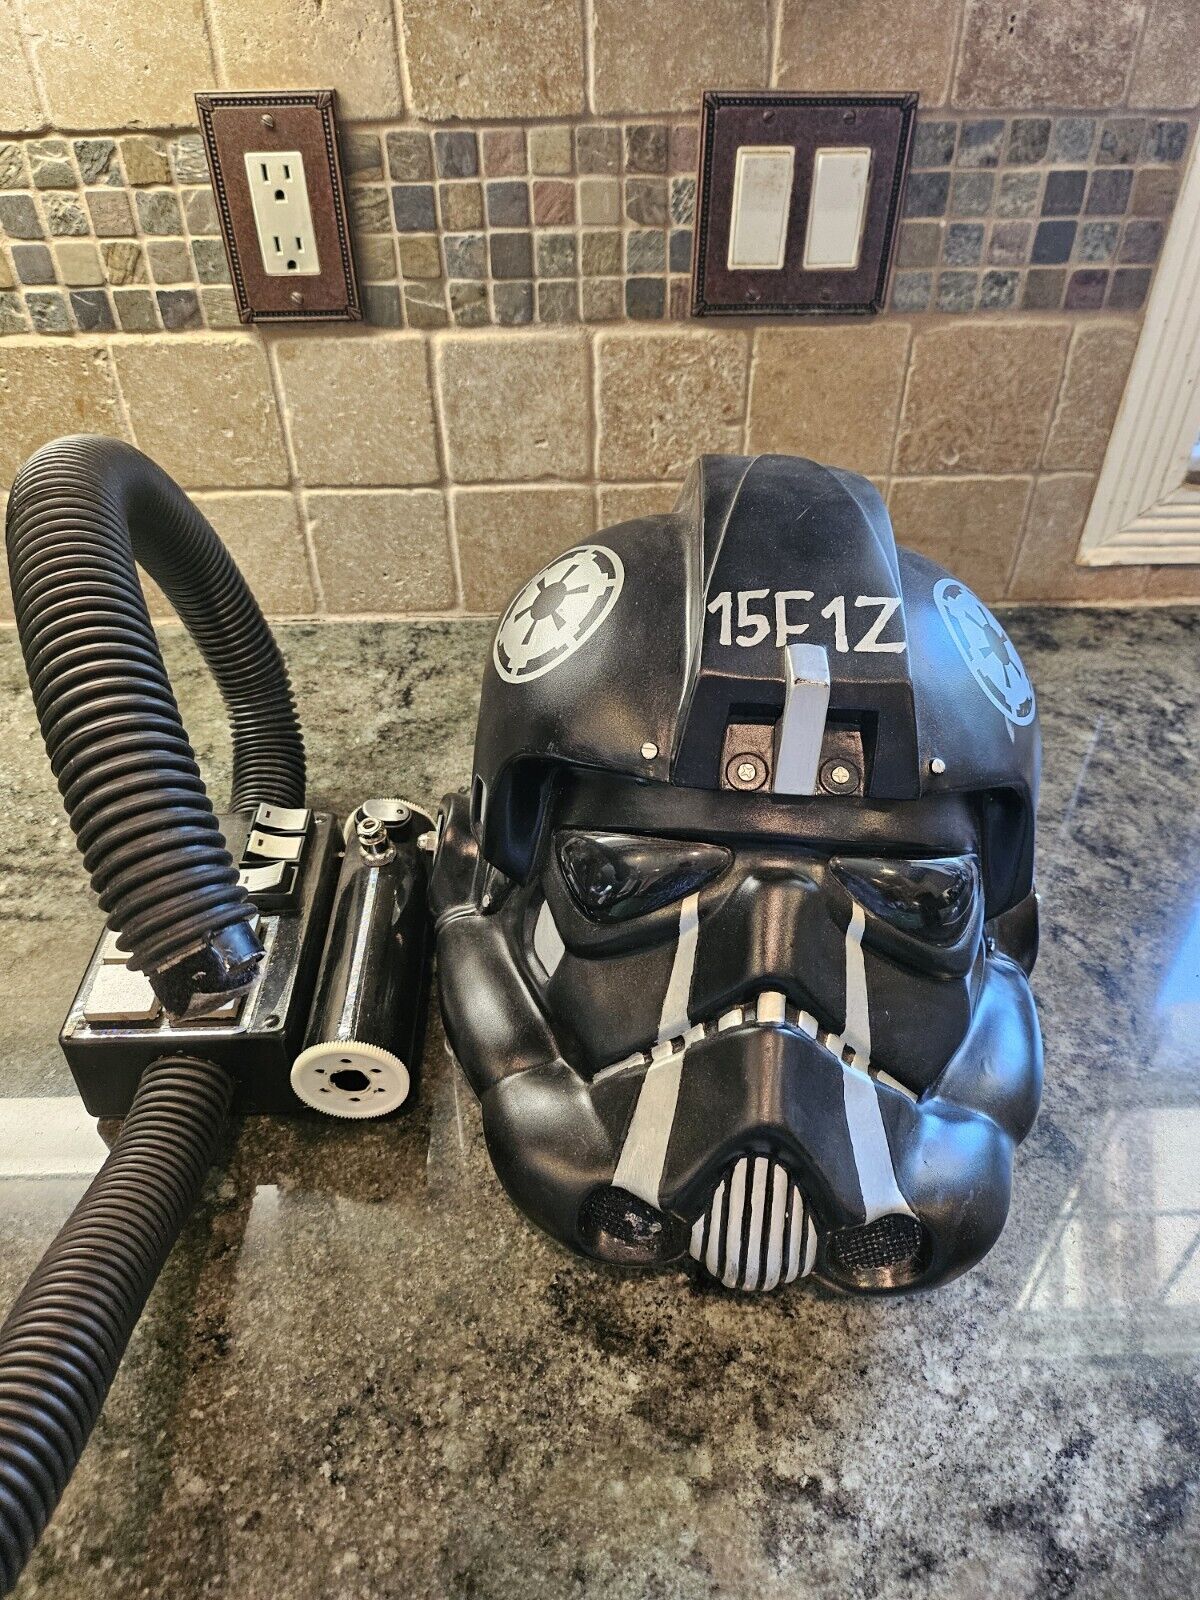 Rubies star wars Tie Fighter Pilot helmet with Box And Hoses